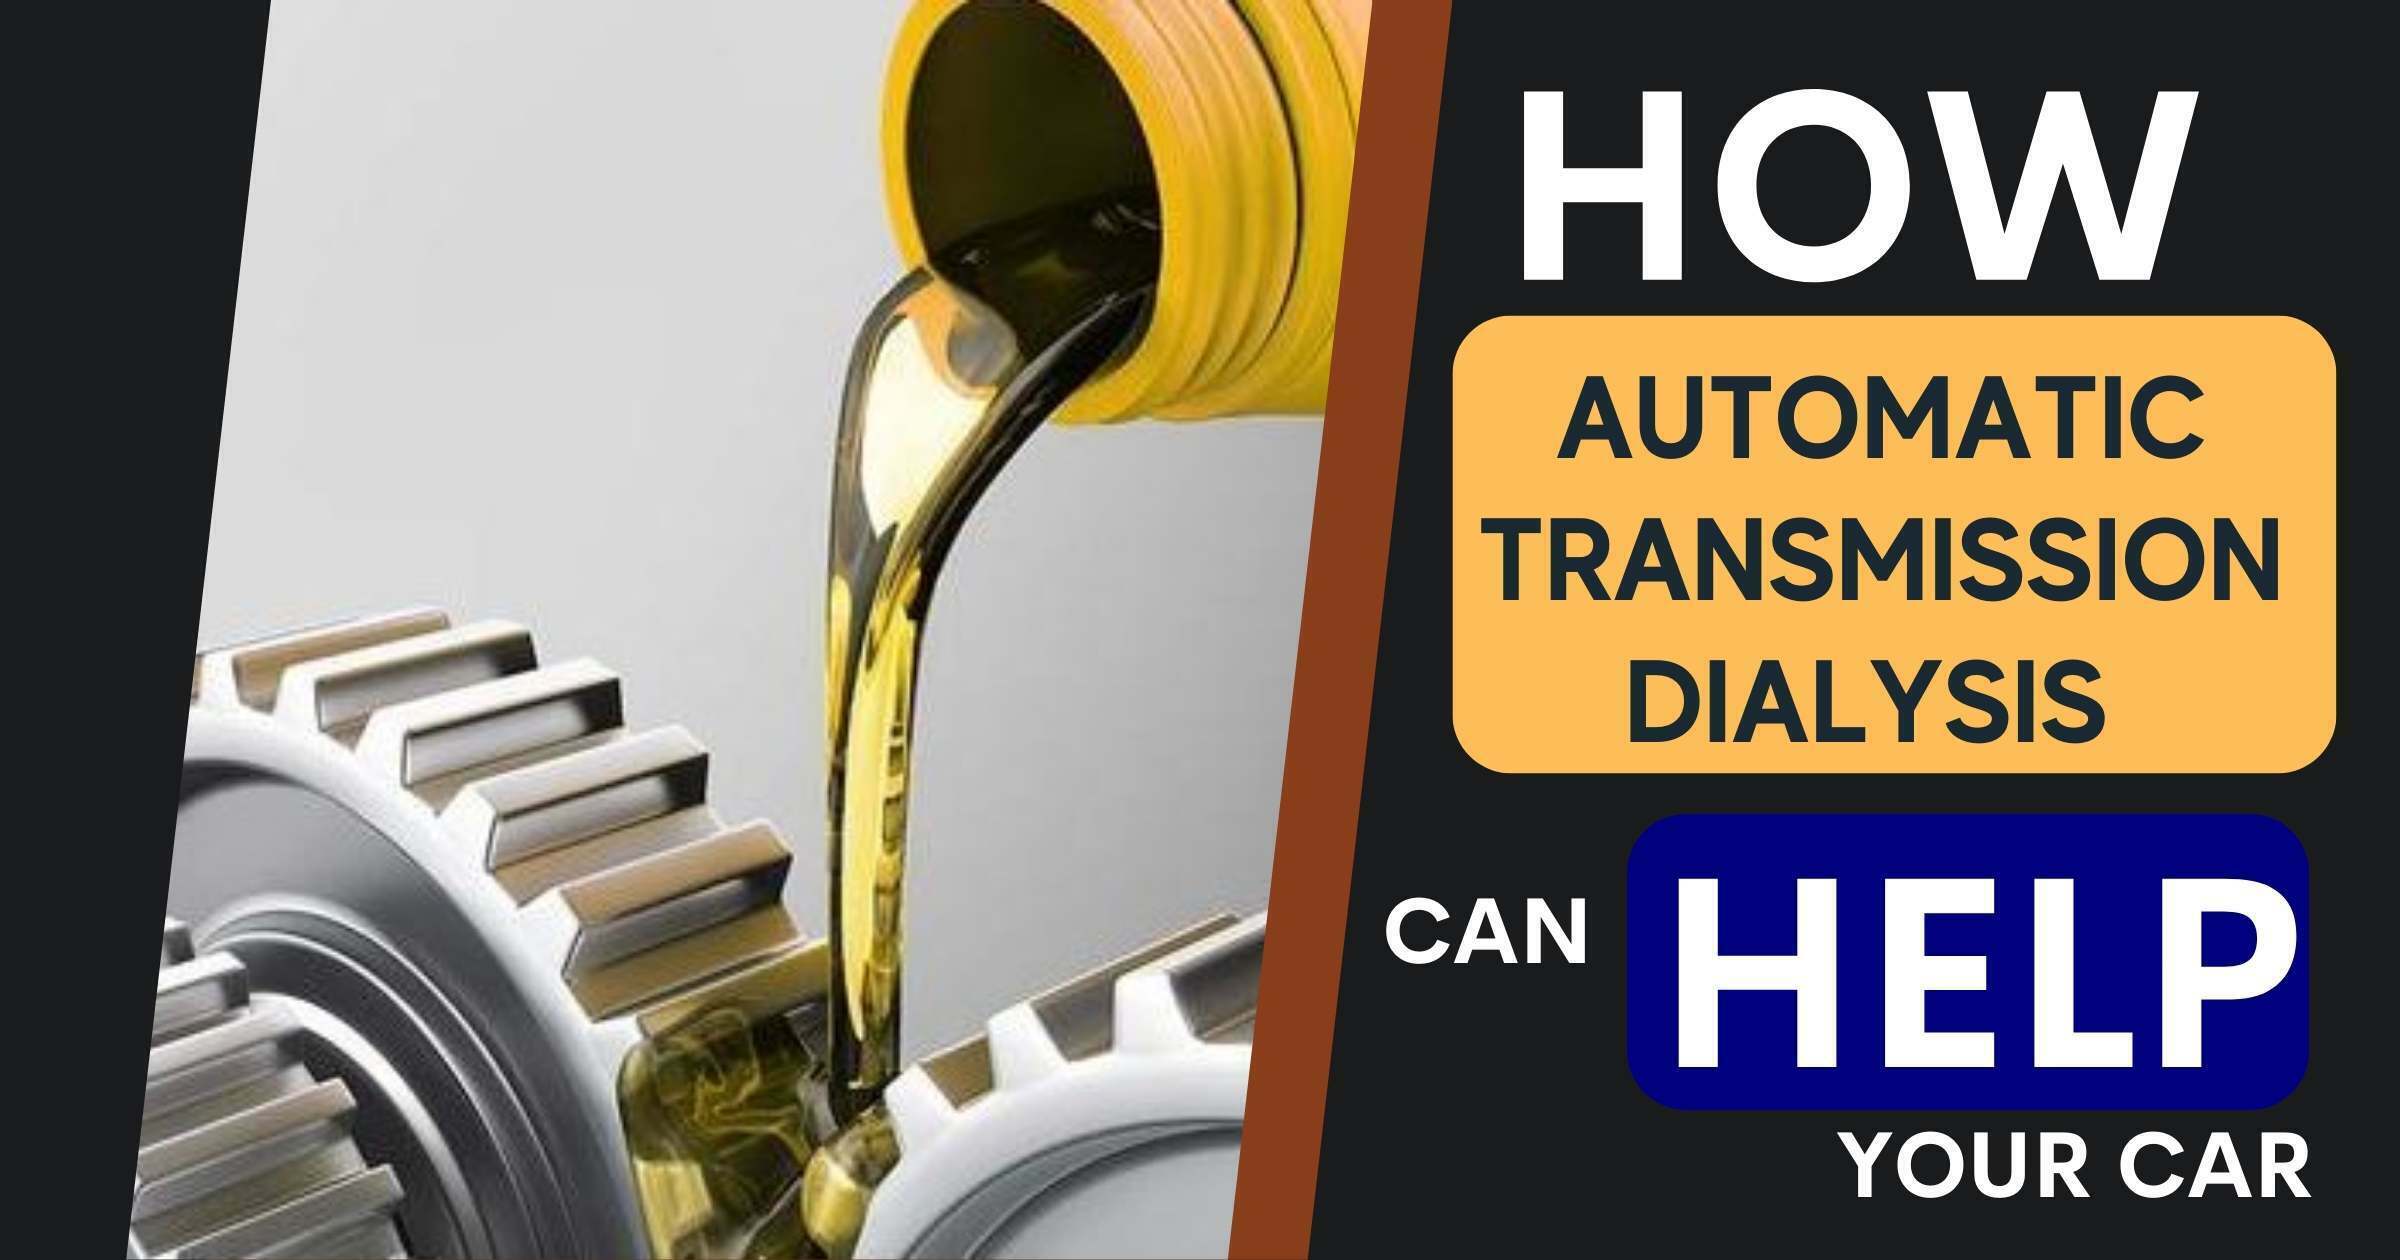 The Many Benefits of Automatic Transmission Dialysis